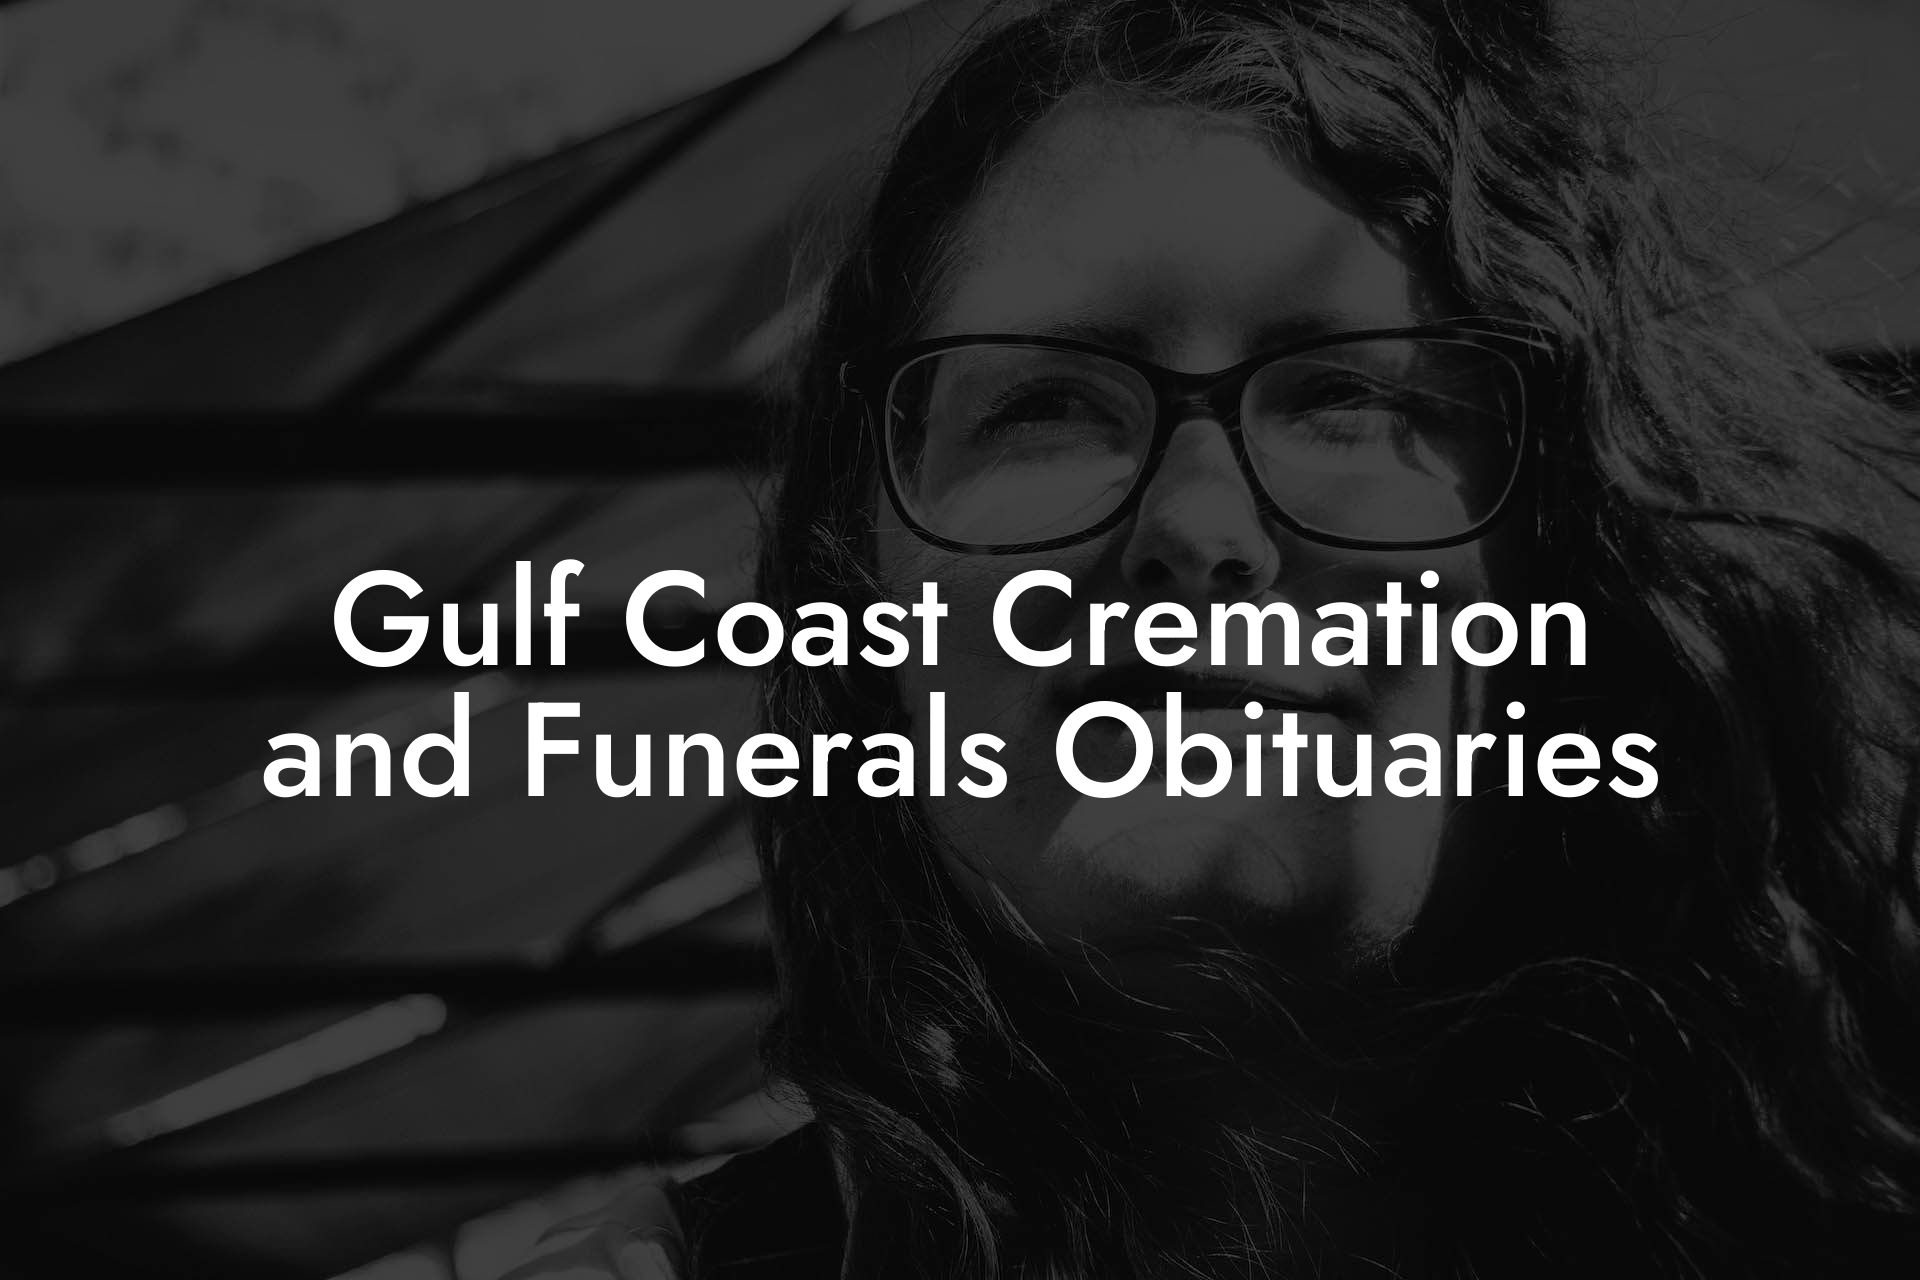 Gulf Coast Cremation and Funerals Obituaries